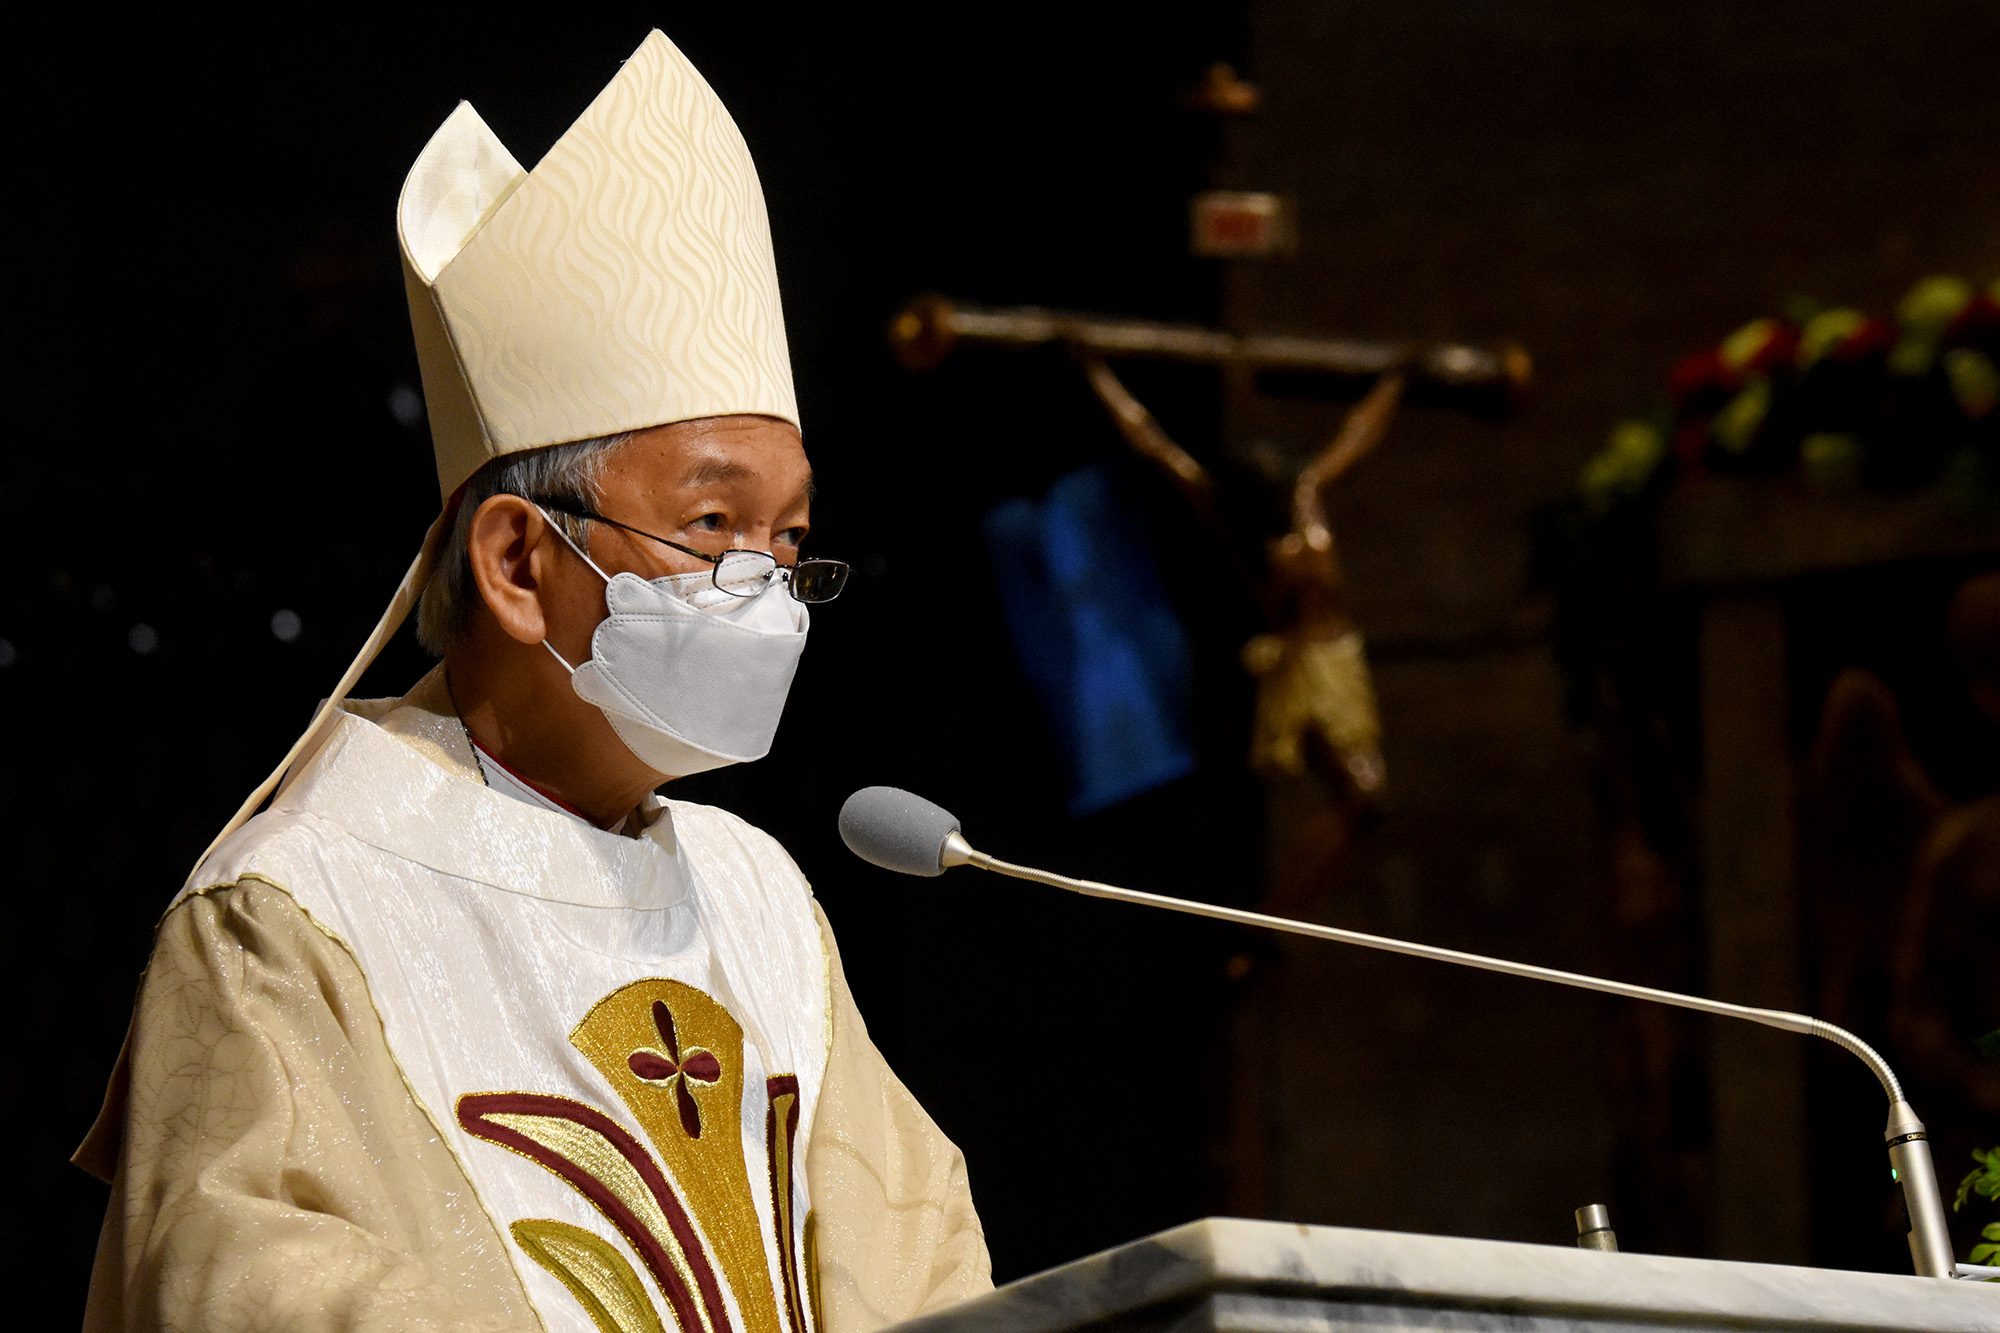 Pabillo on Easter Vigil: ‘Sickness, stupidity won’t have the final say’